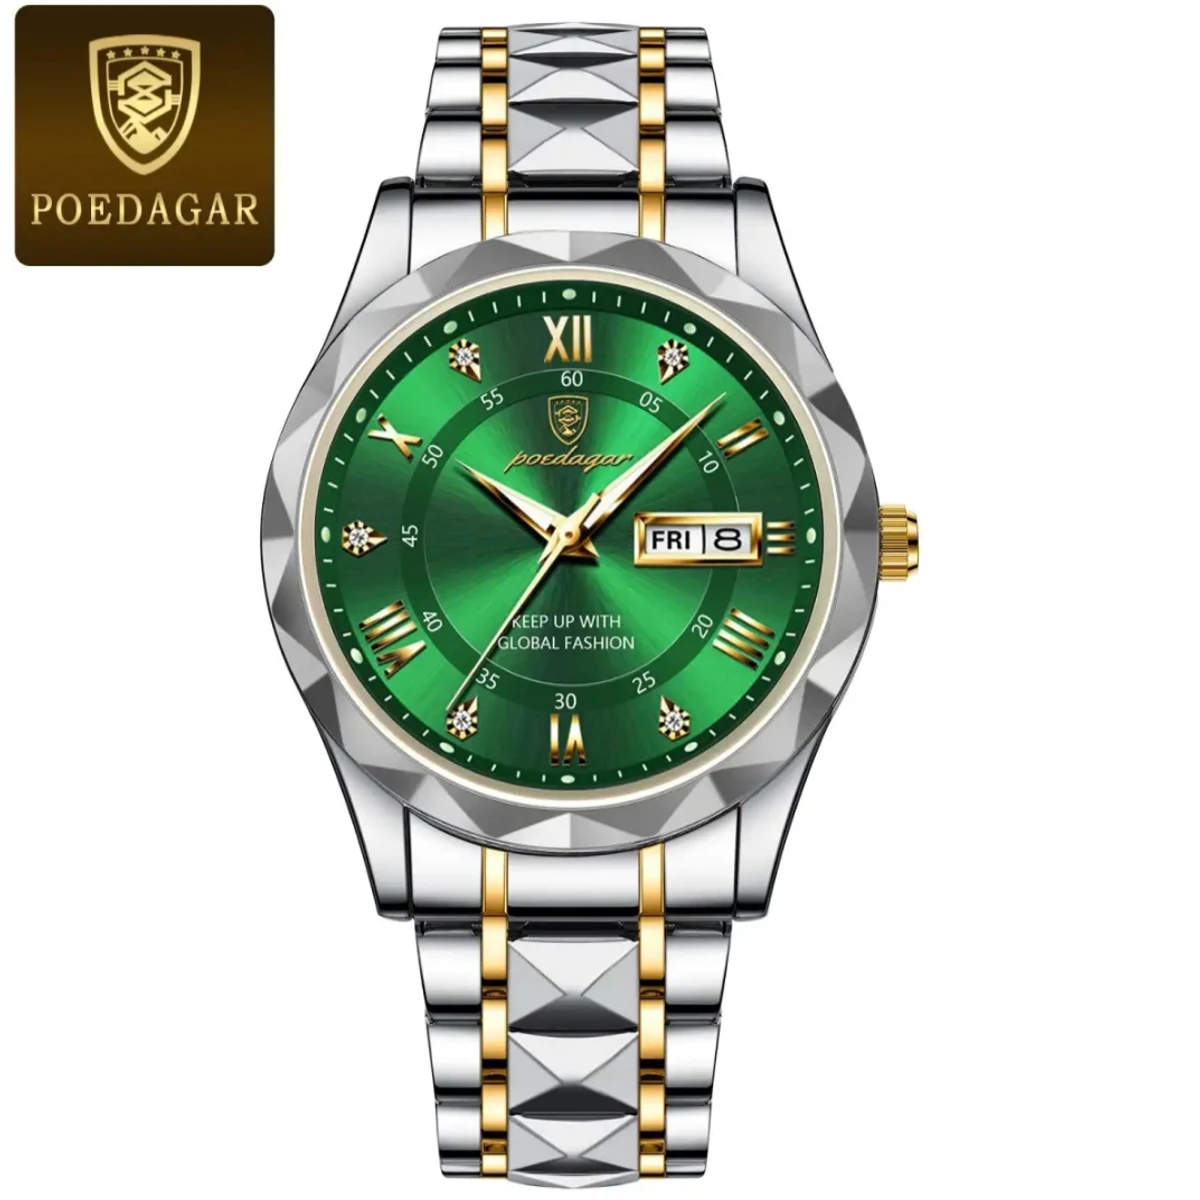 POEDAGAR Automatic Day and Date Stylish Formal Watch